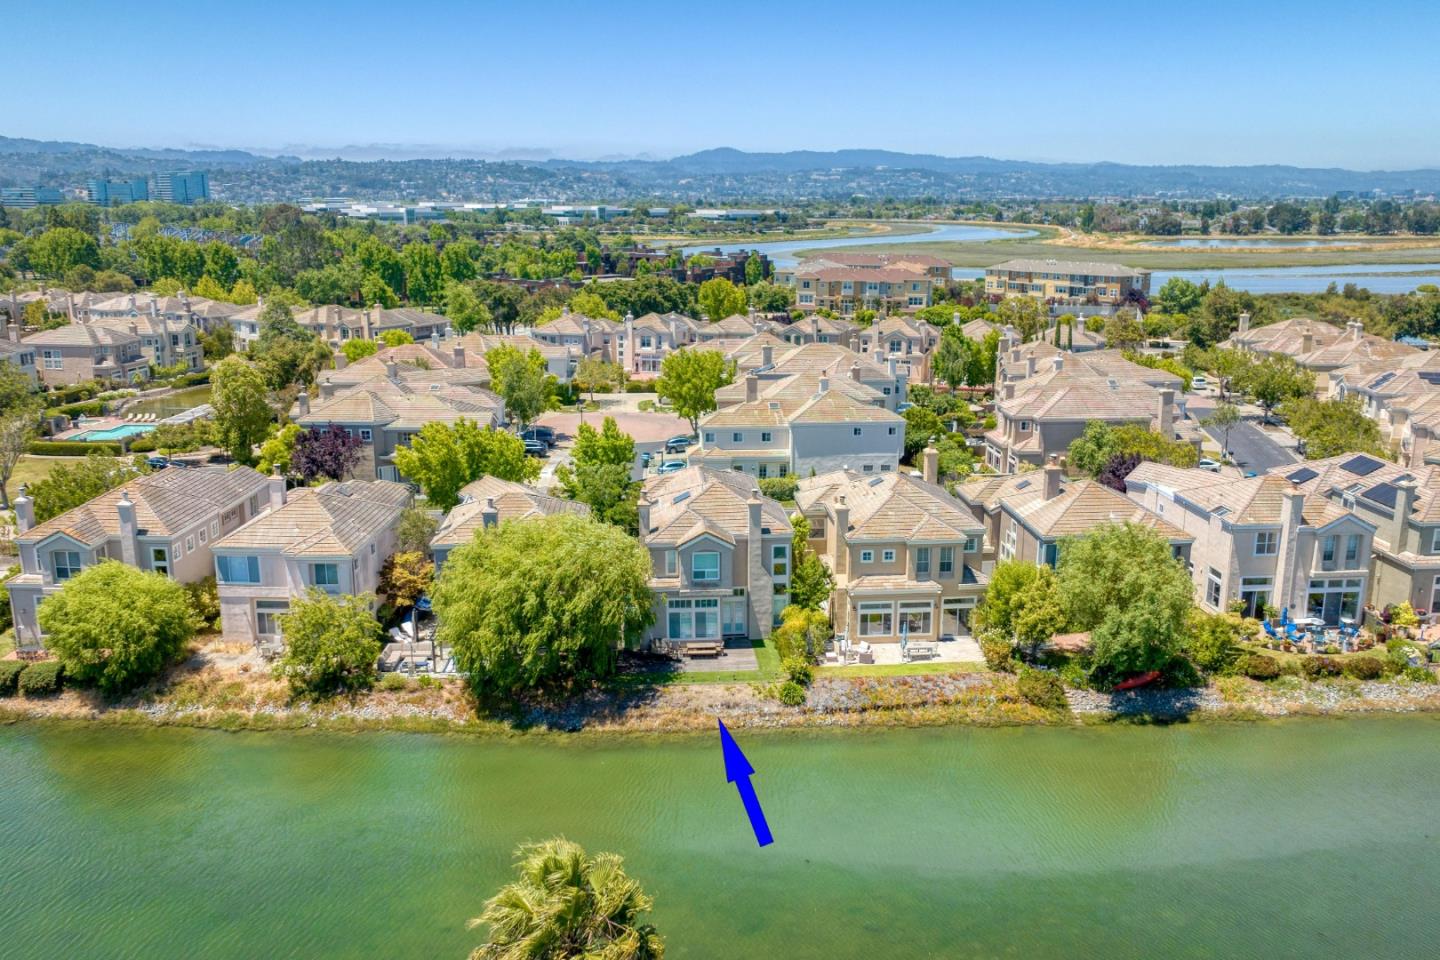 Spacious waterfront home overlooking expansive Redwood Shores Lagoon.